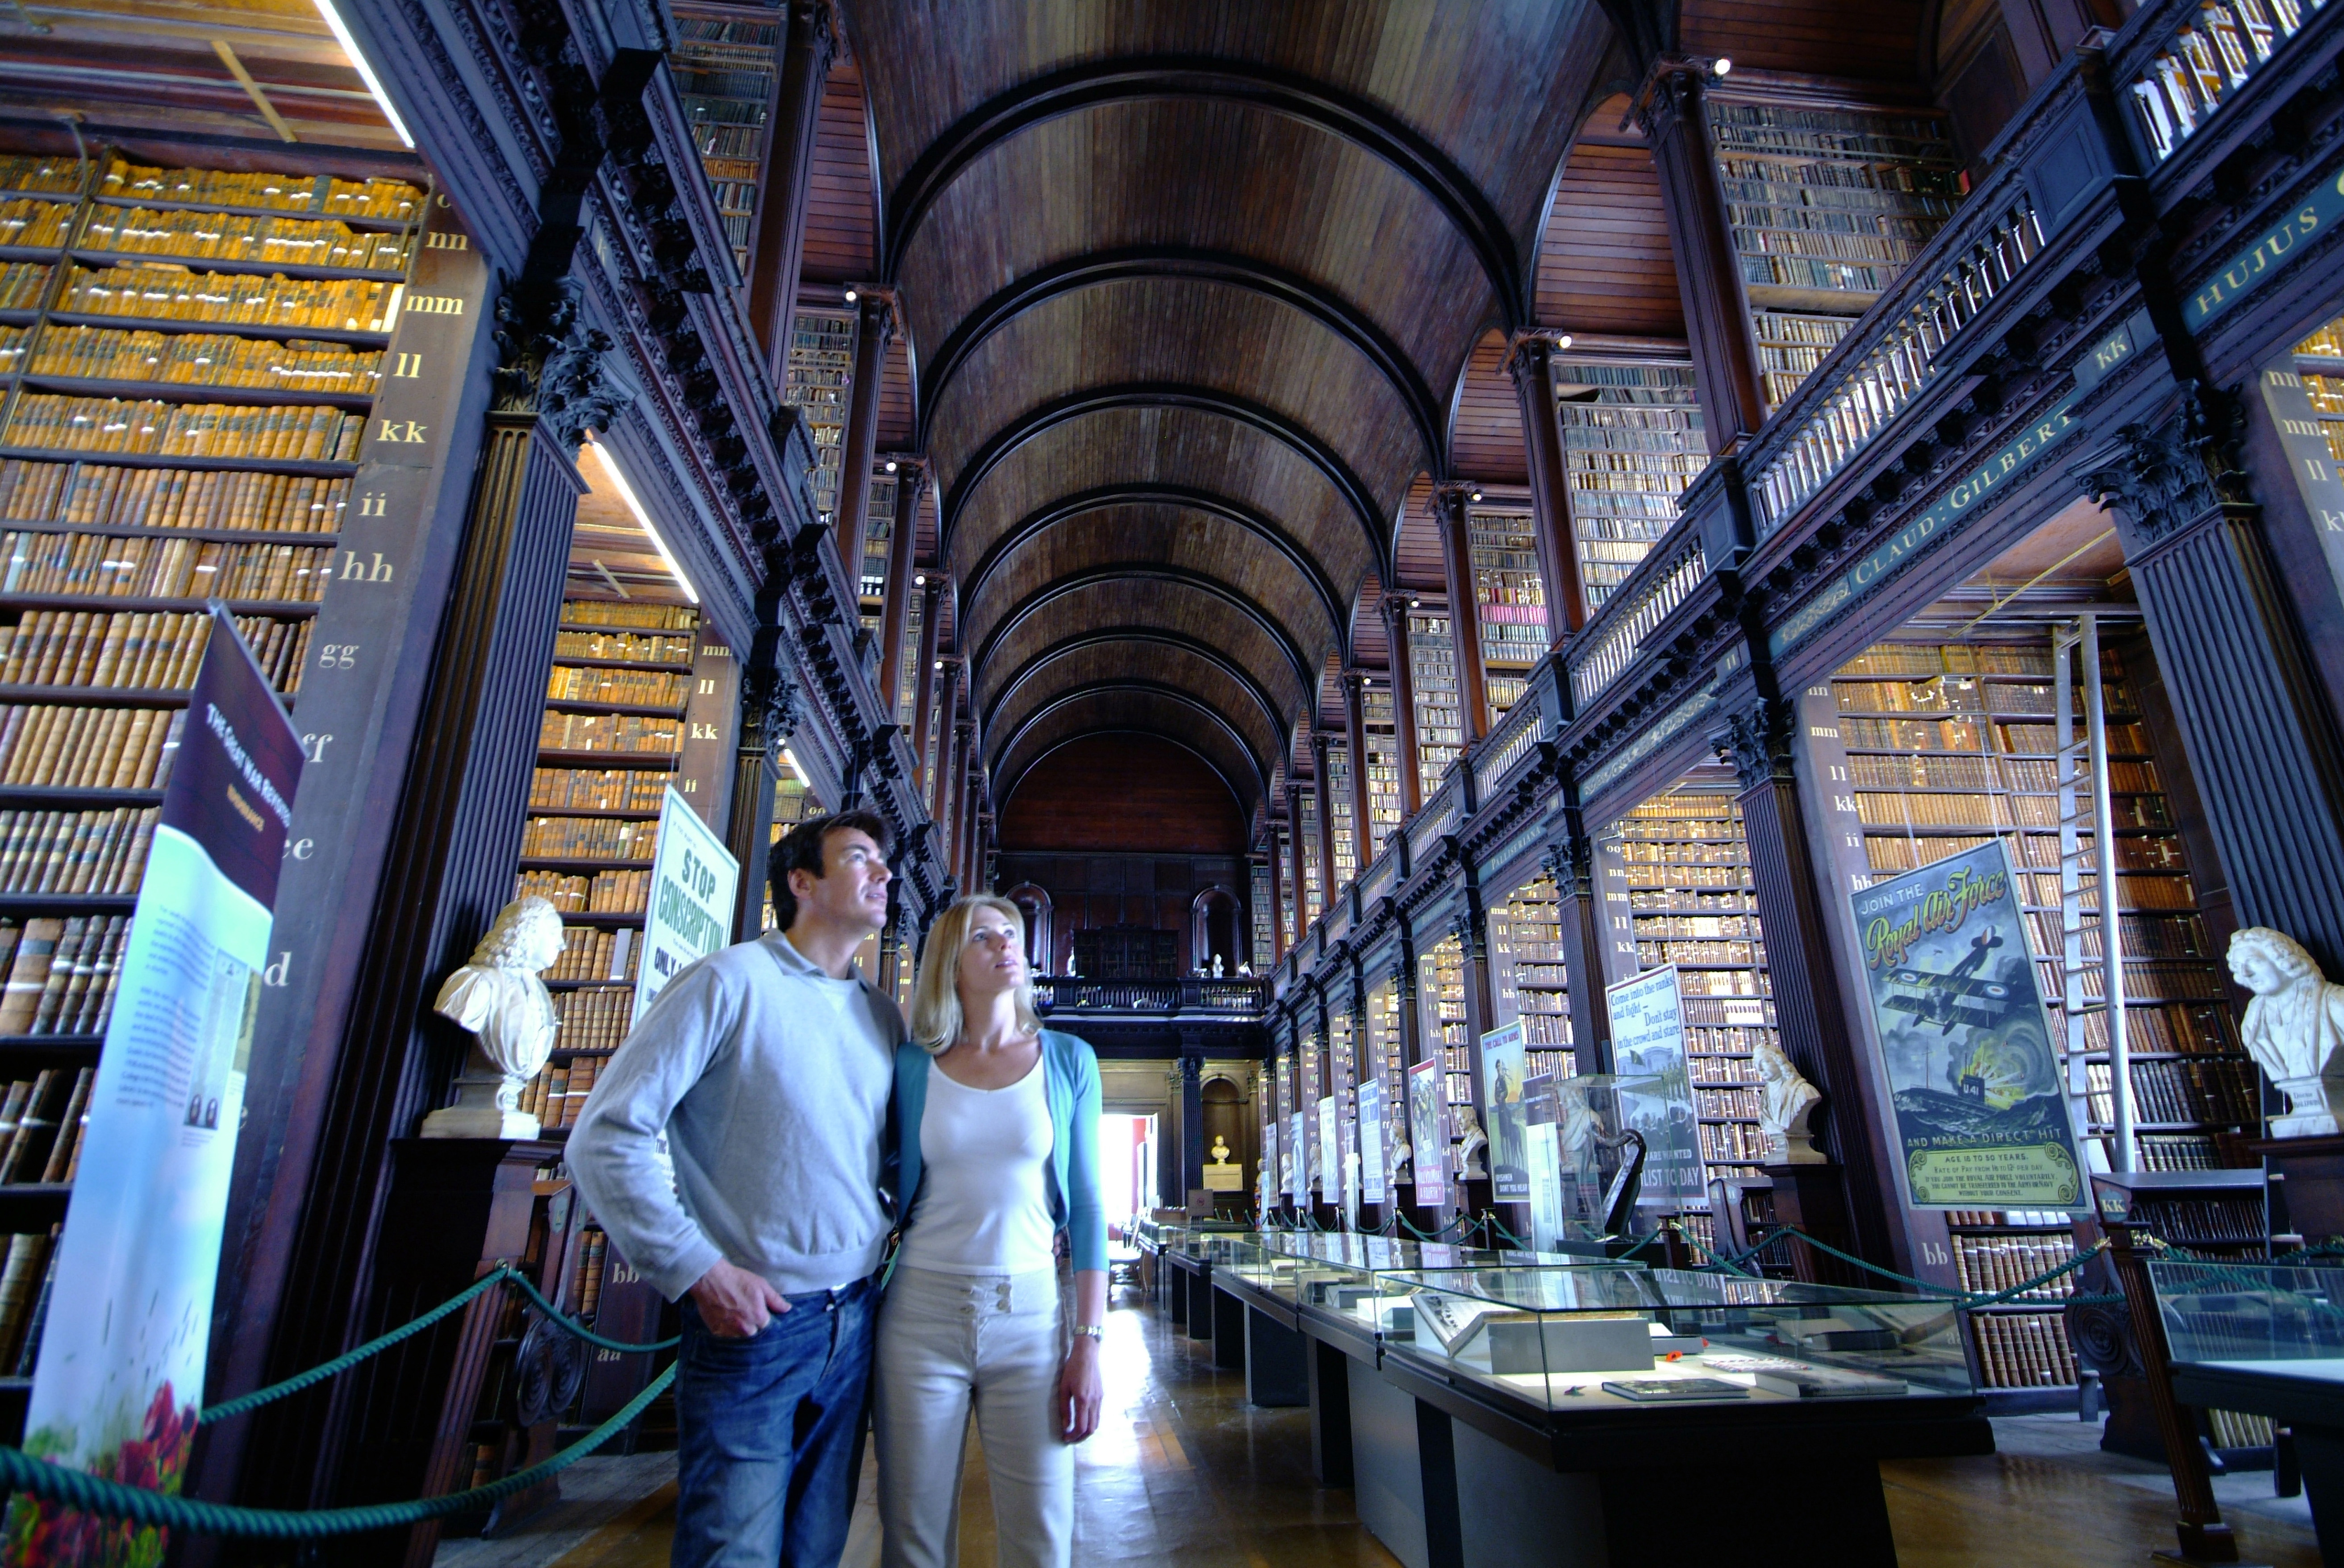 The Book of Kells is the centrepiece of an exhibition which attracts over 500,000 visitors to Trinity College in Dublin City each year. It is Ireland’s greatest cultural treasure and the world’s most famous medieval manuscript.